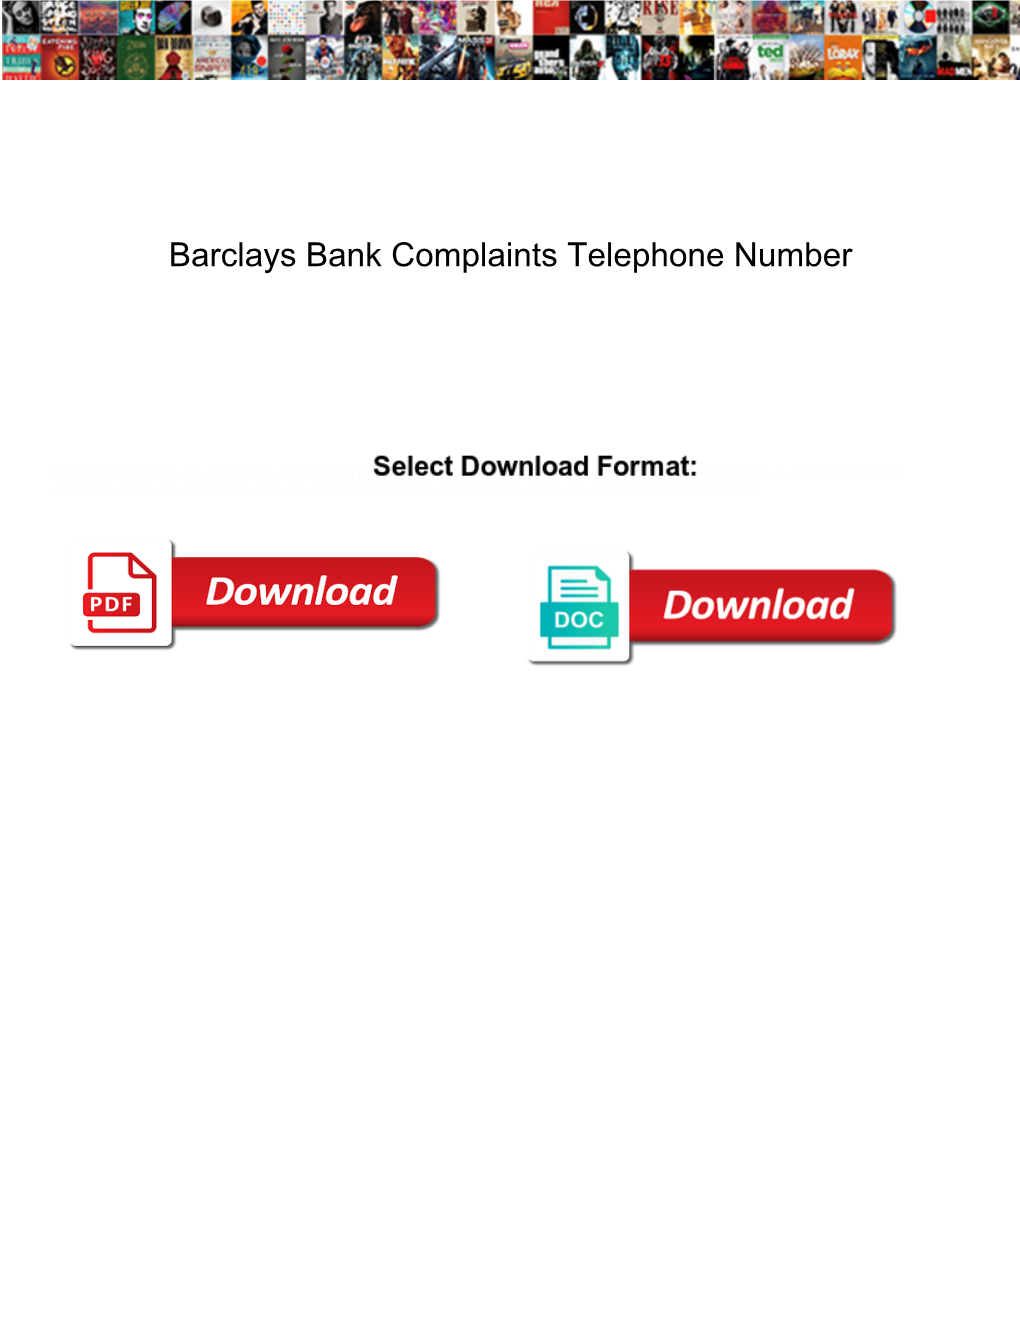 Barclays Bank Complaints Telephone Number